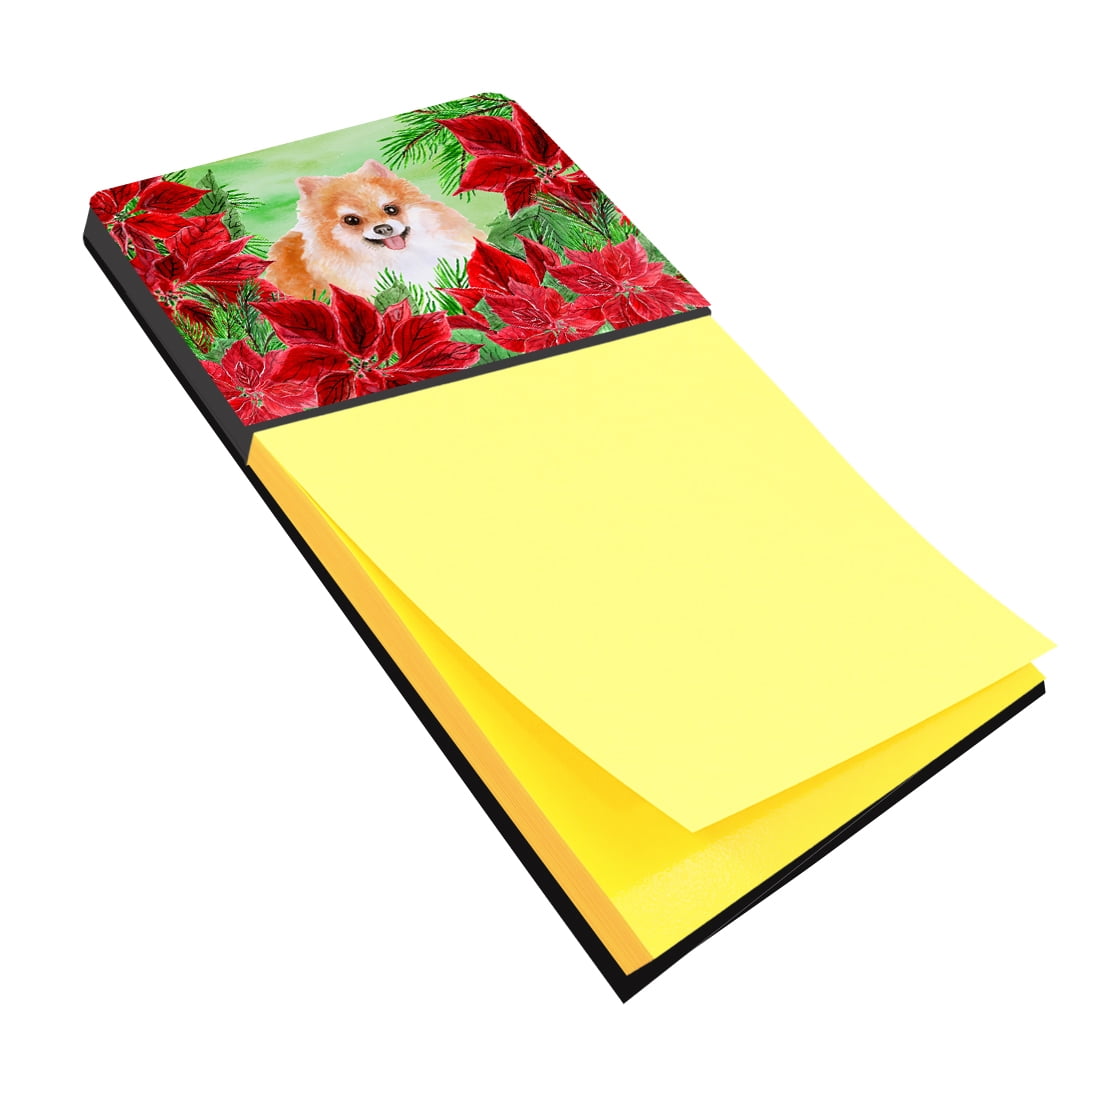 Picture of Carolines Treasures CK1363SN Pomeranian No. 2 Poinsettas Sticky Note Holder